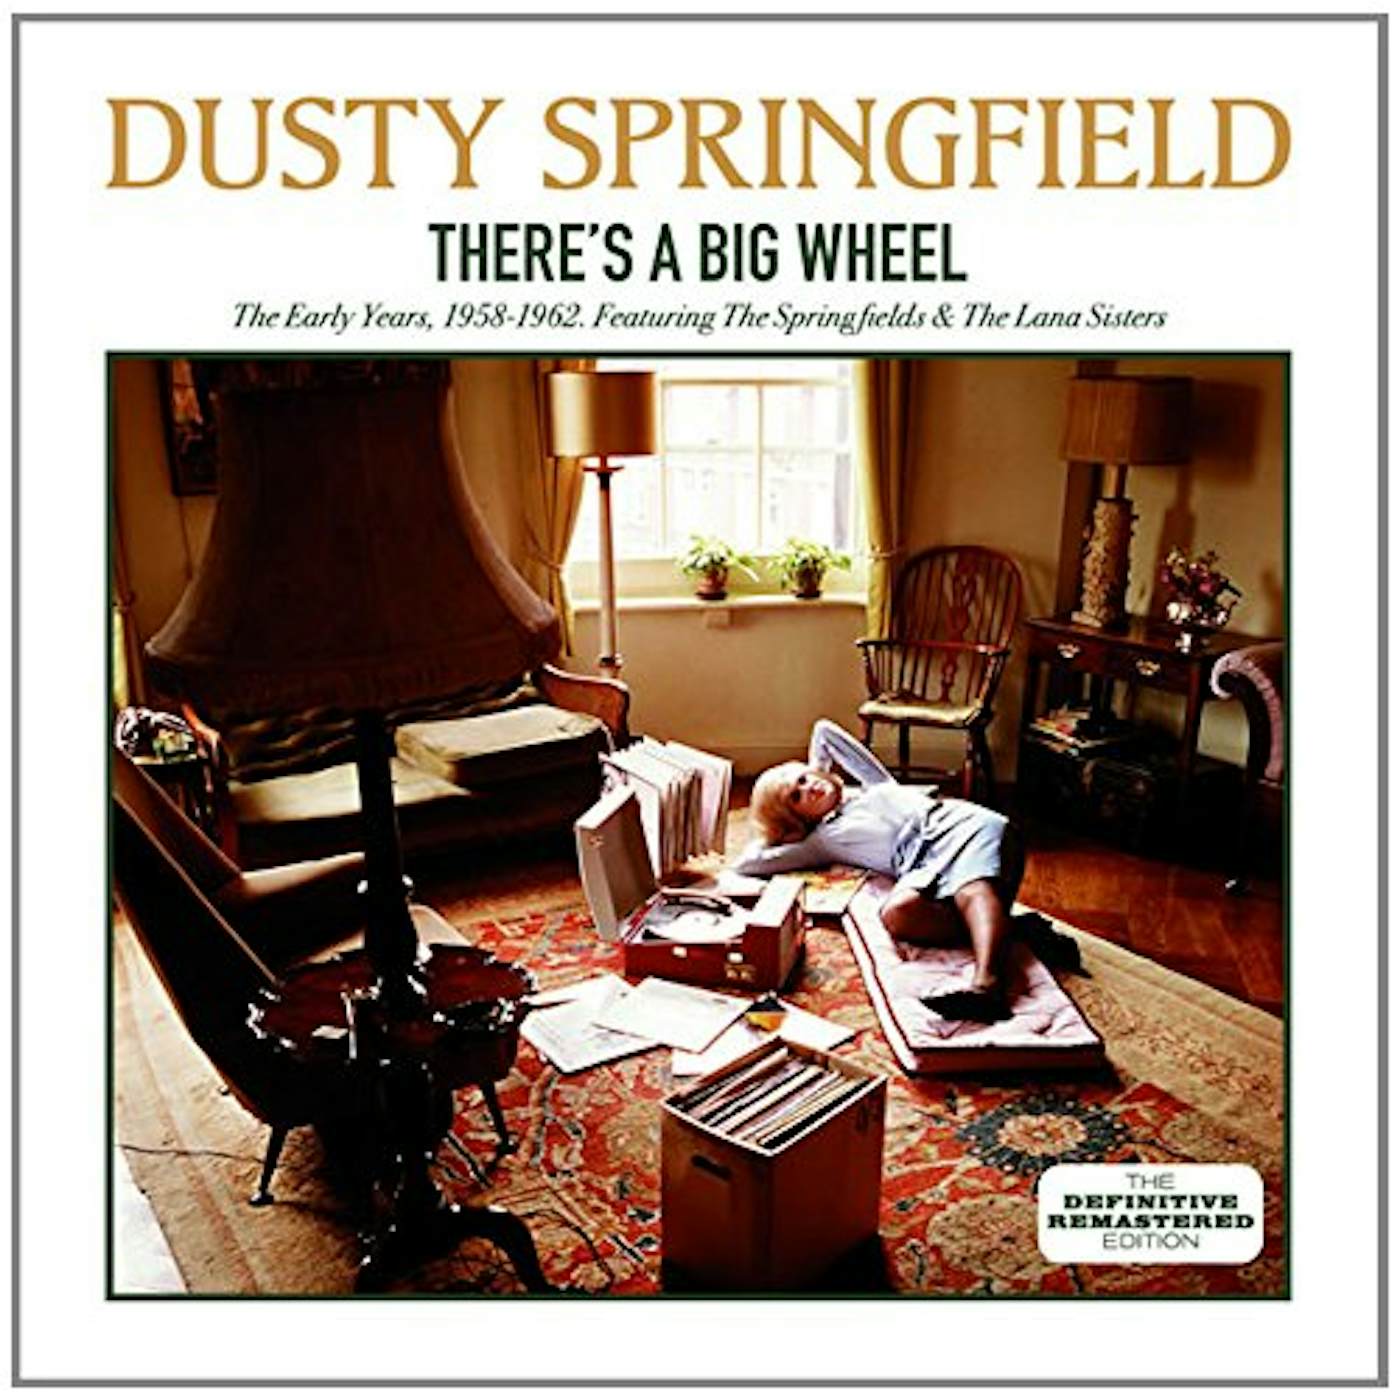 Dusty Springfield THERE'S A BIG WHEEL CD